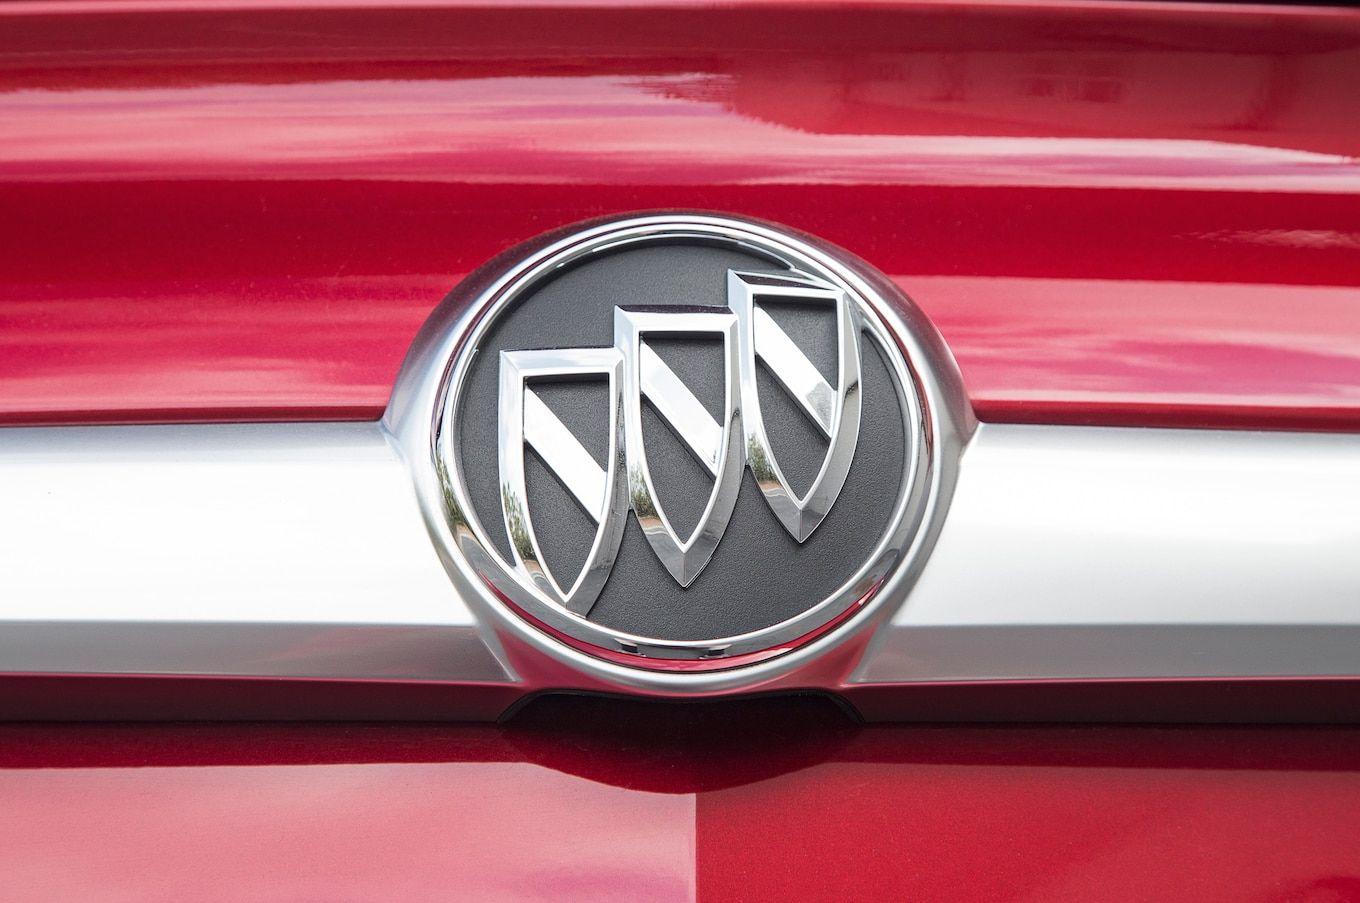 2014 Buick Logo - 2014 Buick Regal Reviews and Rating | Motortrend